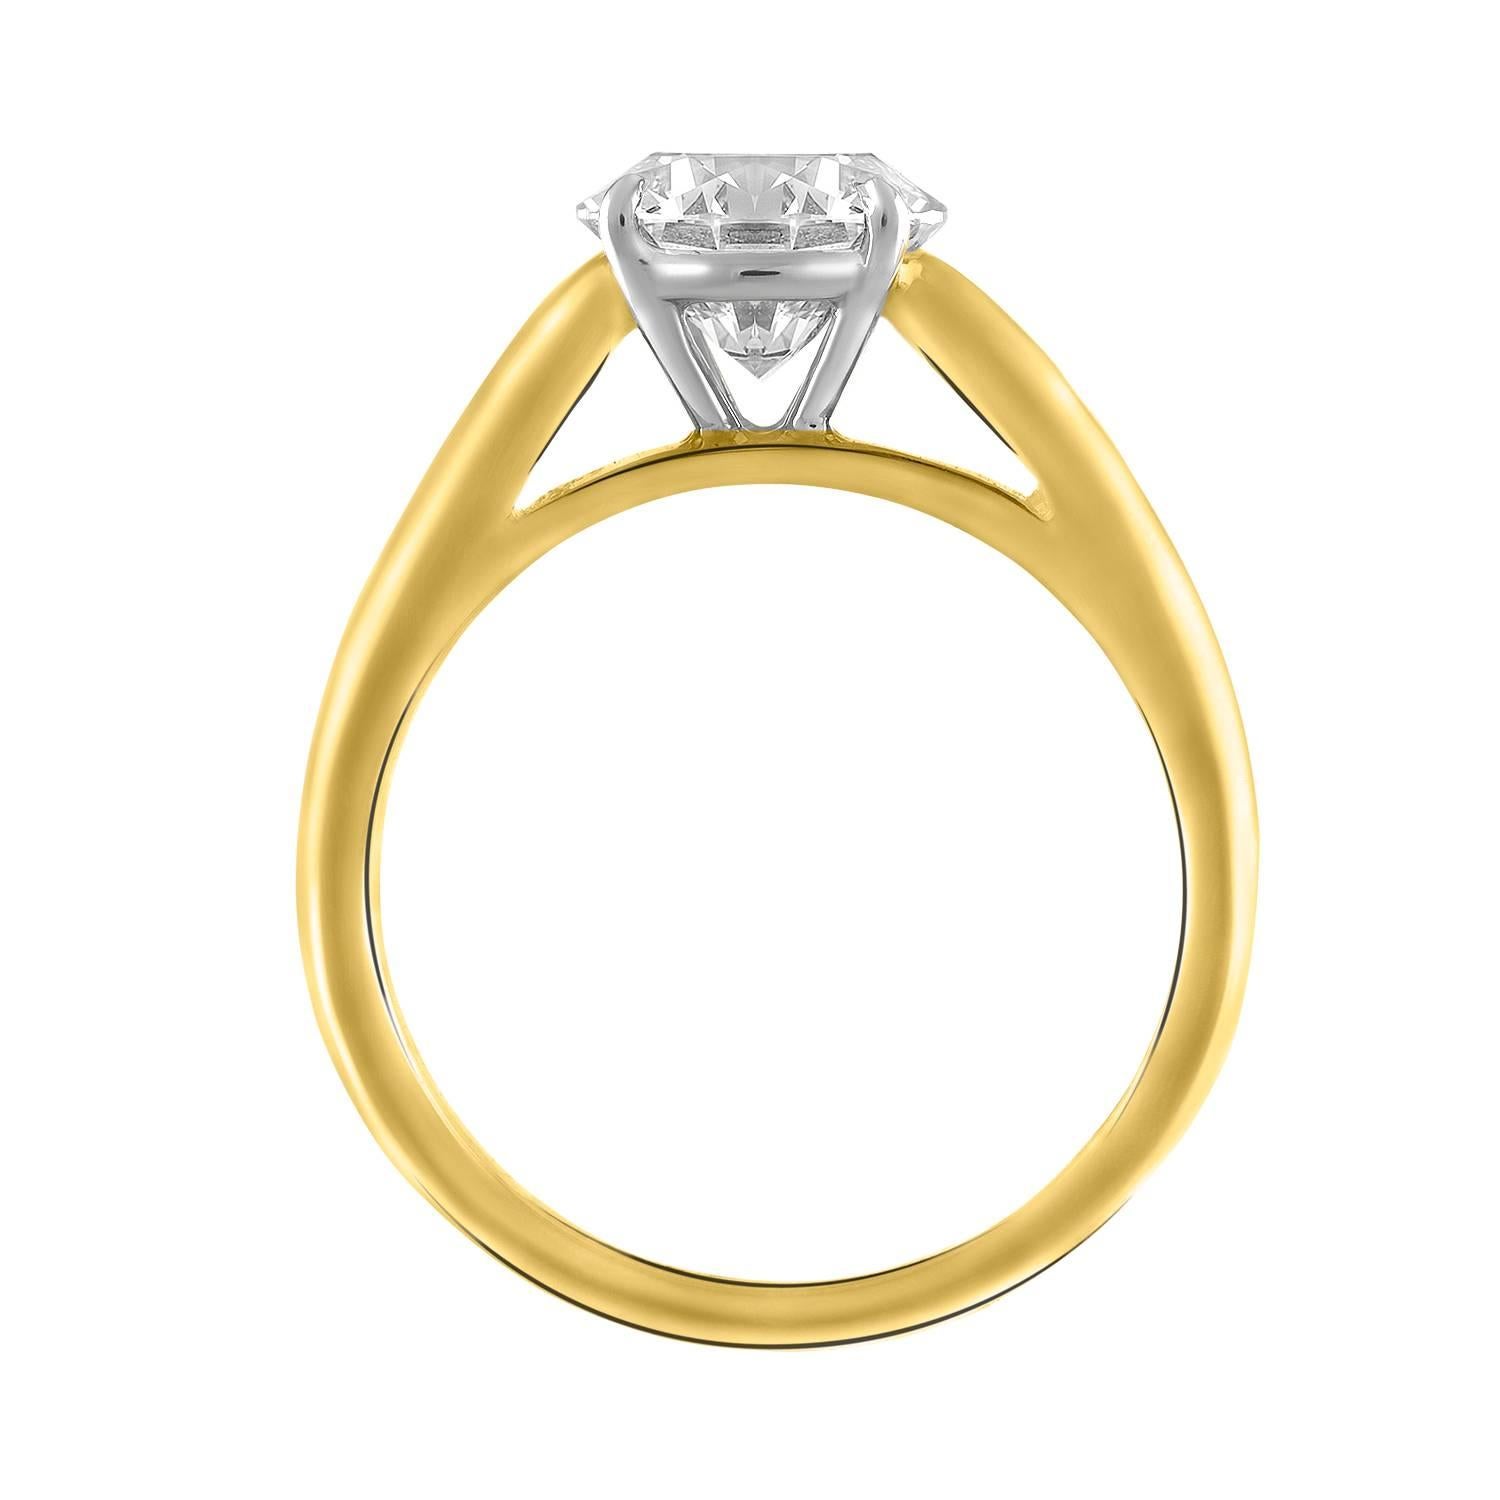 This 1.73ct G/VVS2 GIA certified round brilliant cut diamond is set in Shah & Shah's handmade 18k yellow gold and platinum solitaire ring.

The ring is a size 6. Initial sizing is complimentary and an insurance appraisal is included with your